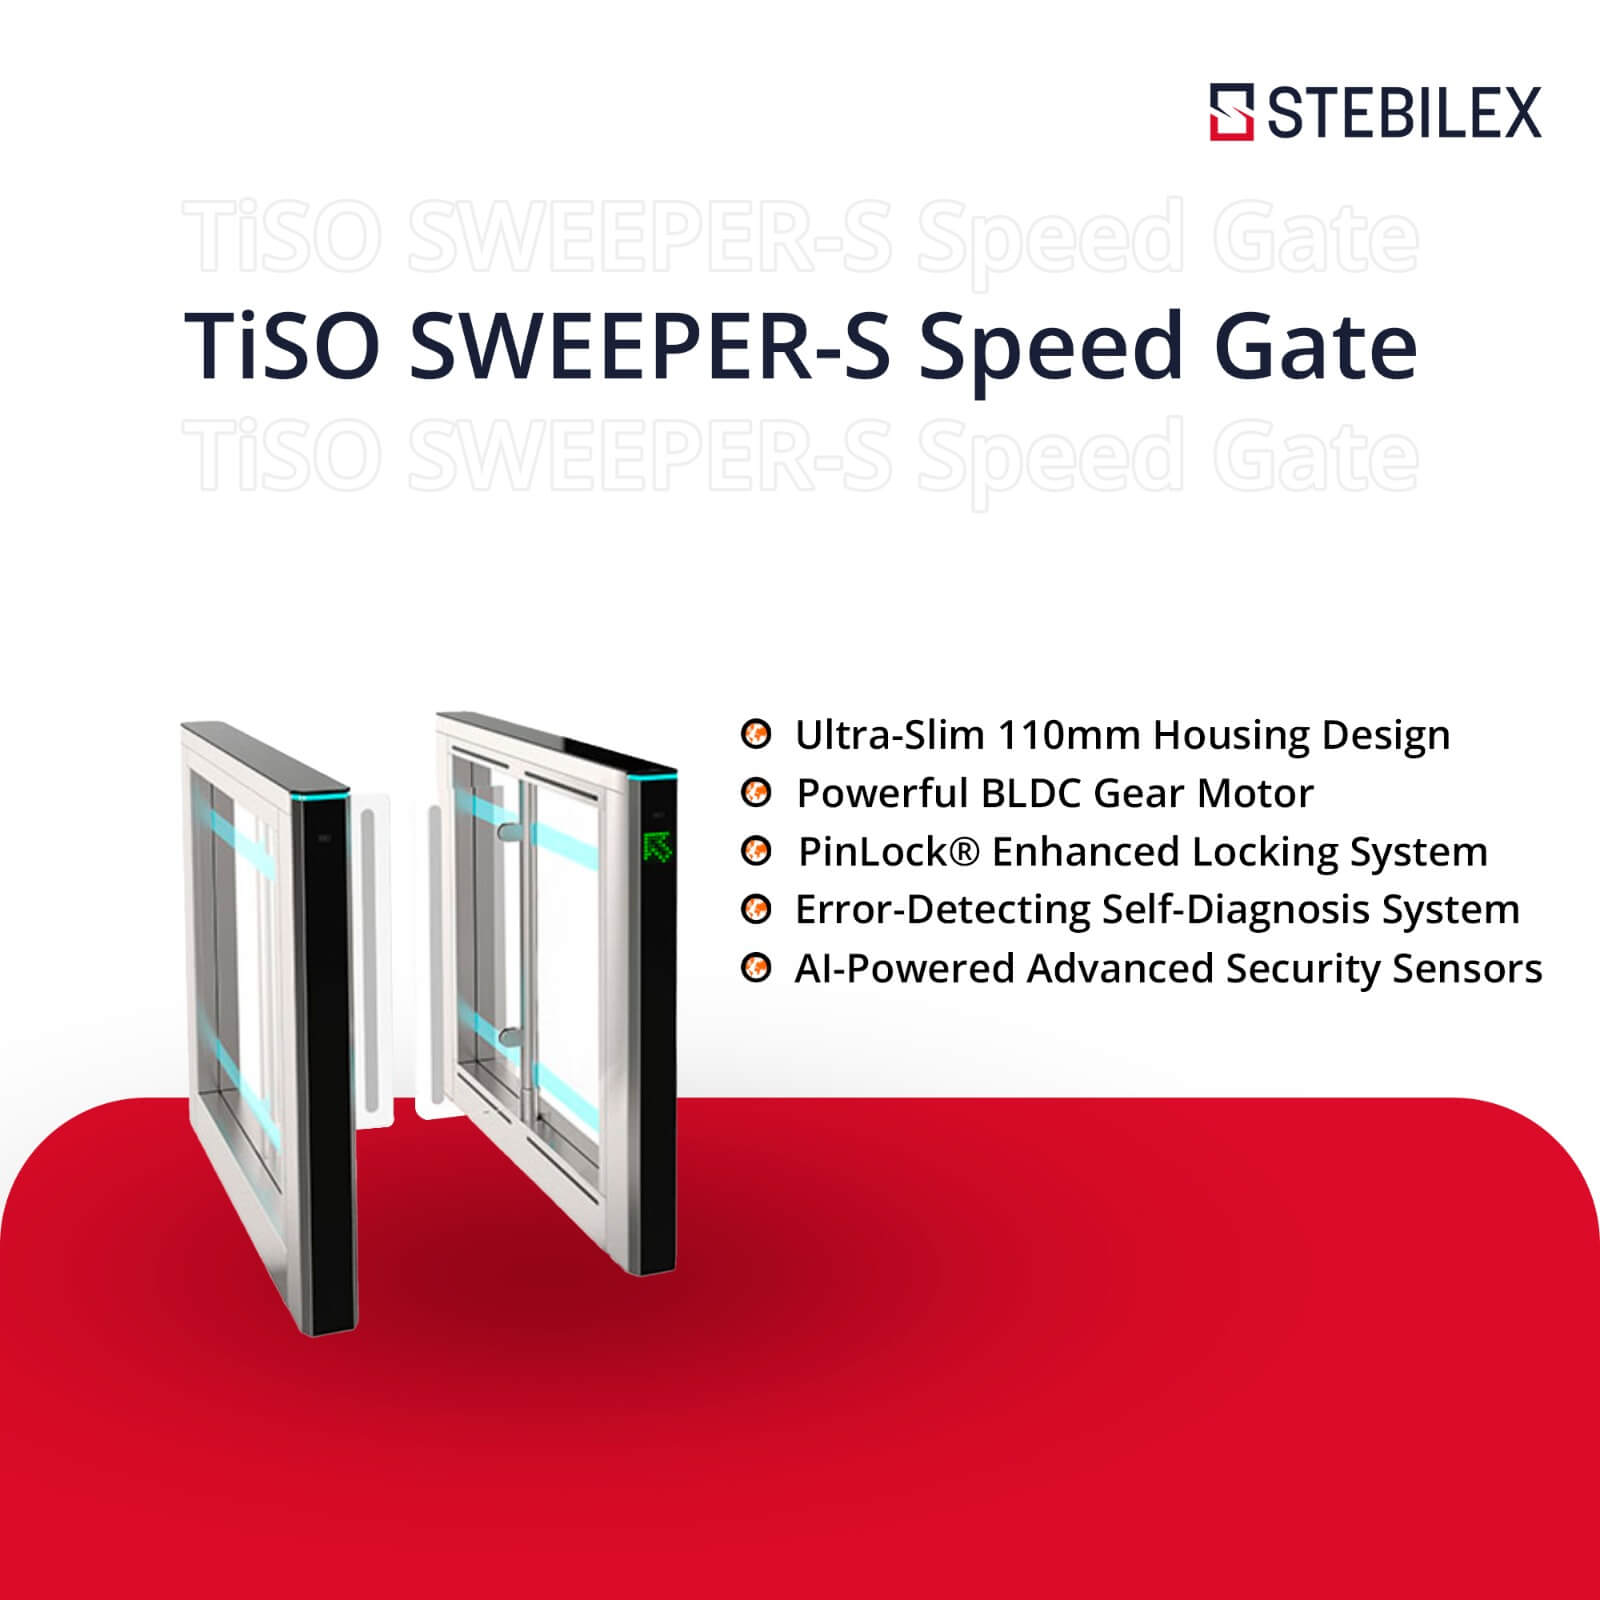 TiSO SWEEPER-S Speed Gate